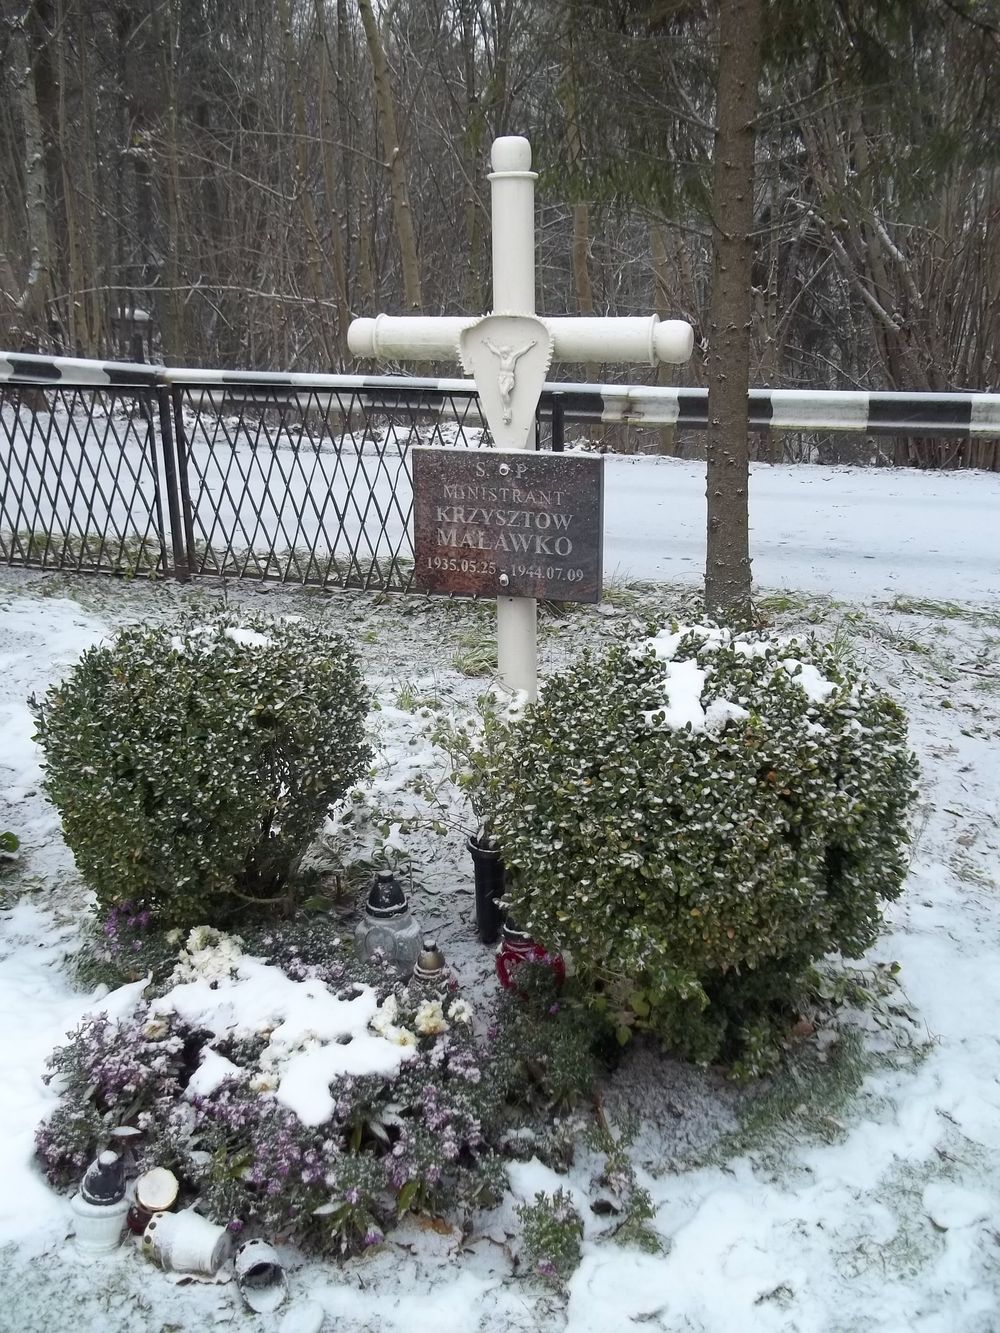 Grave of an altar boy who died in 1944.